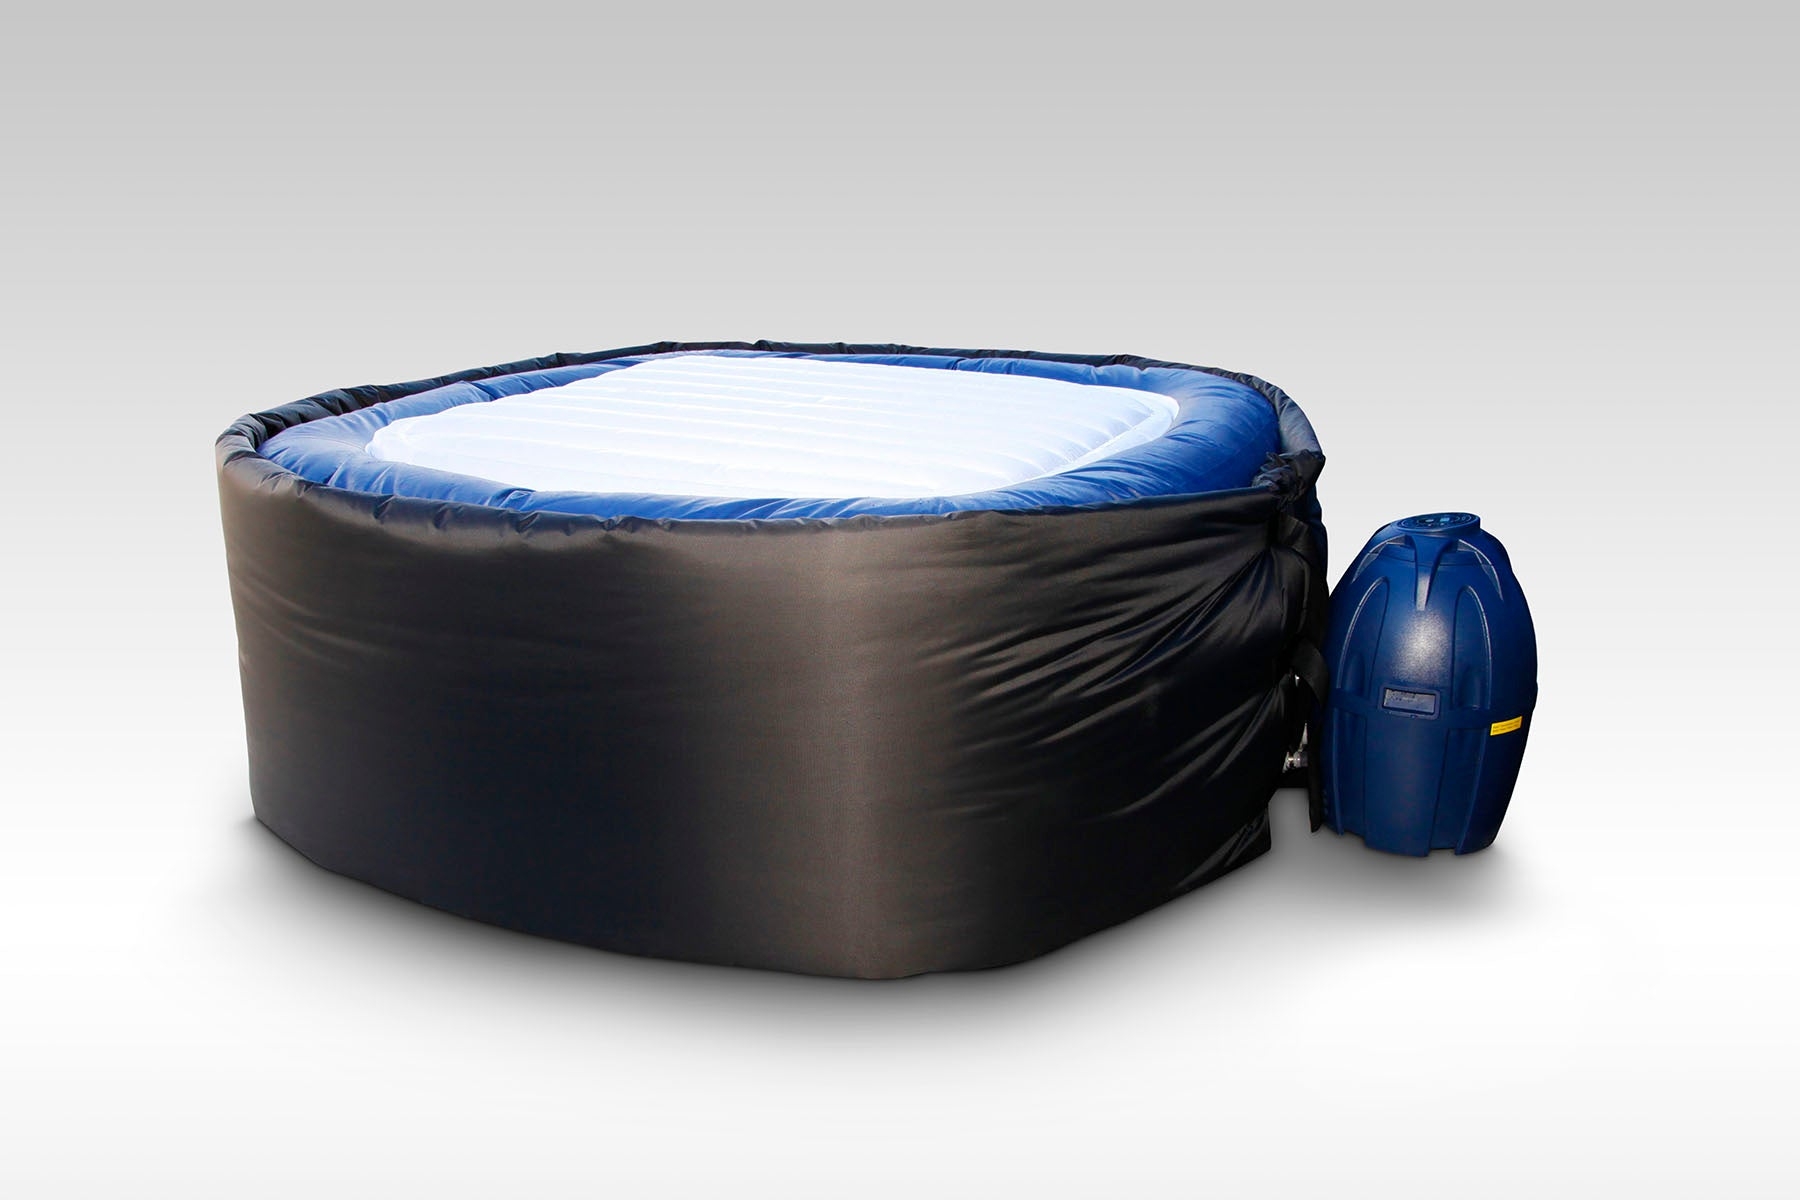 Insulated Jacket / Covers for Inflatable Hot Tub – Protective & Improves Energy Efficiency – Cwtchy Covers